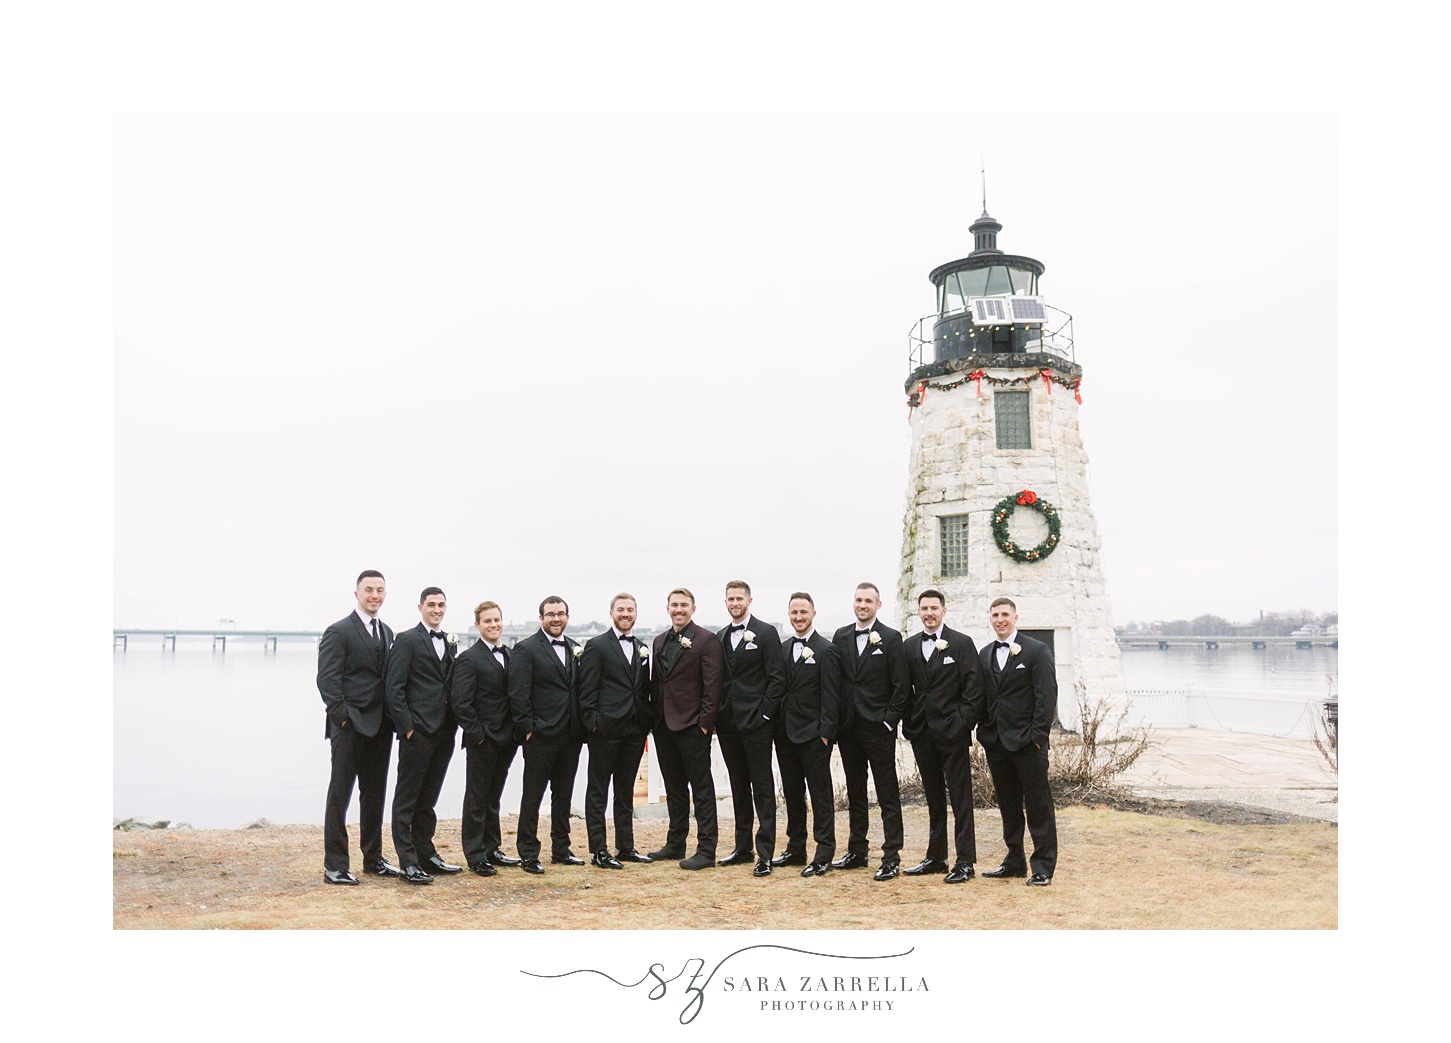 groom and groomsmen pose by lighthouse during winter wedding day